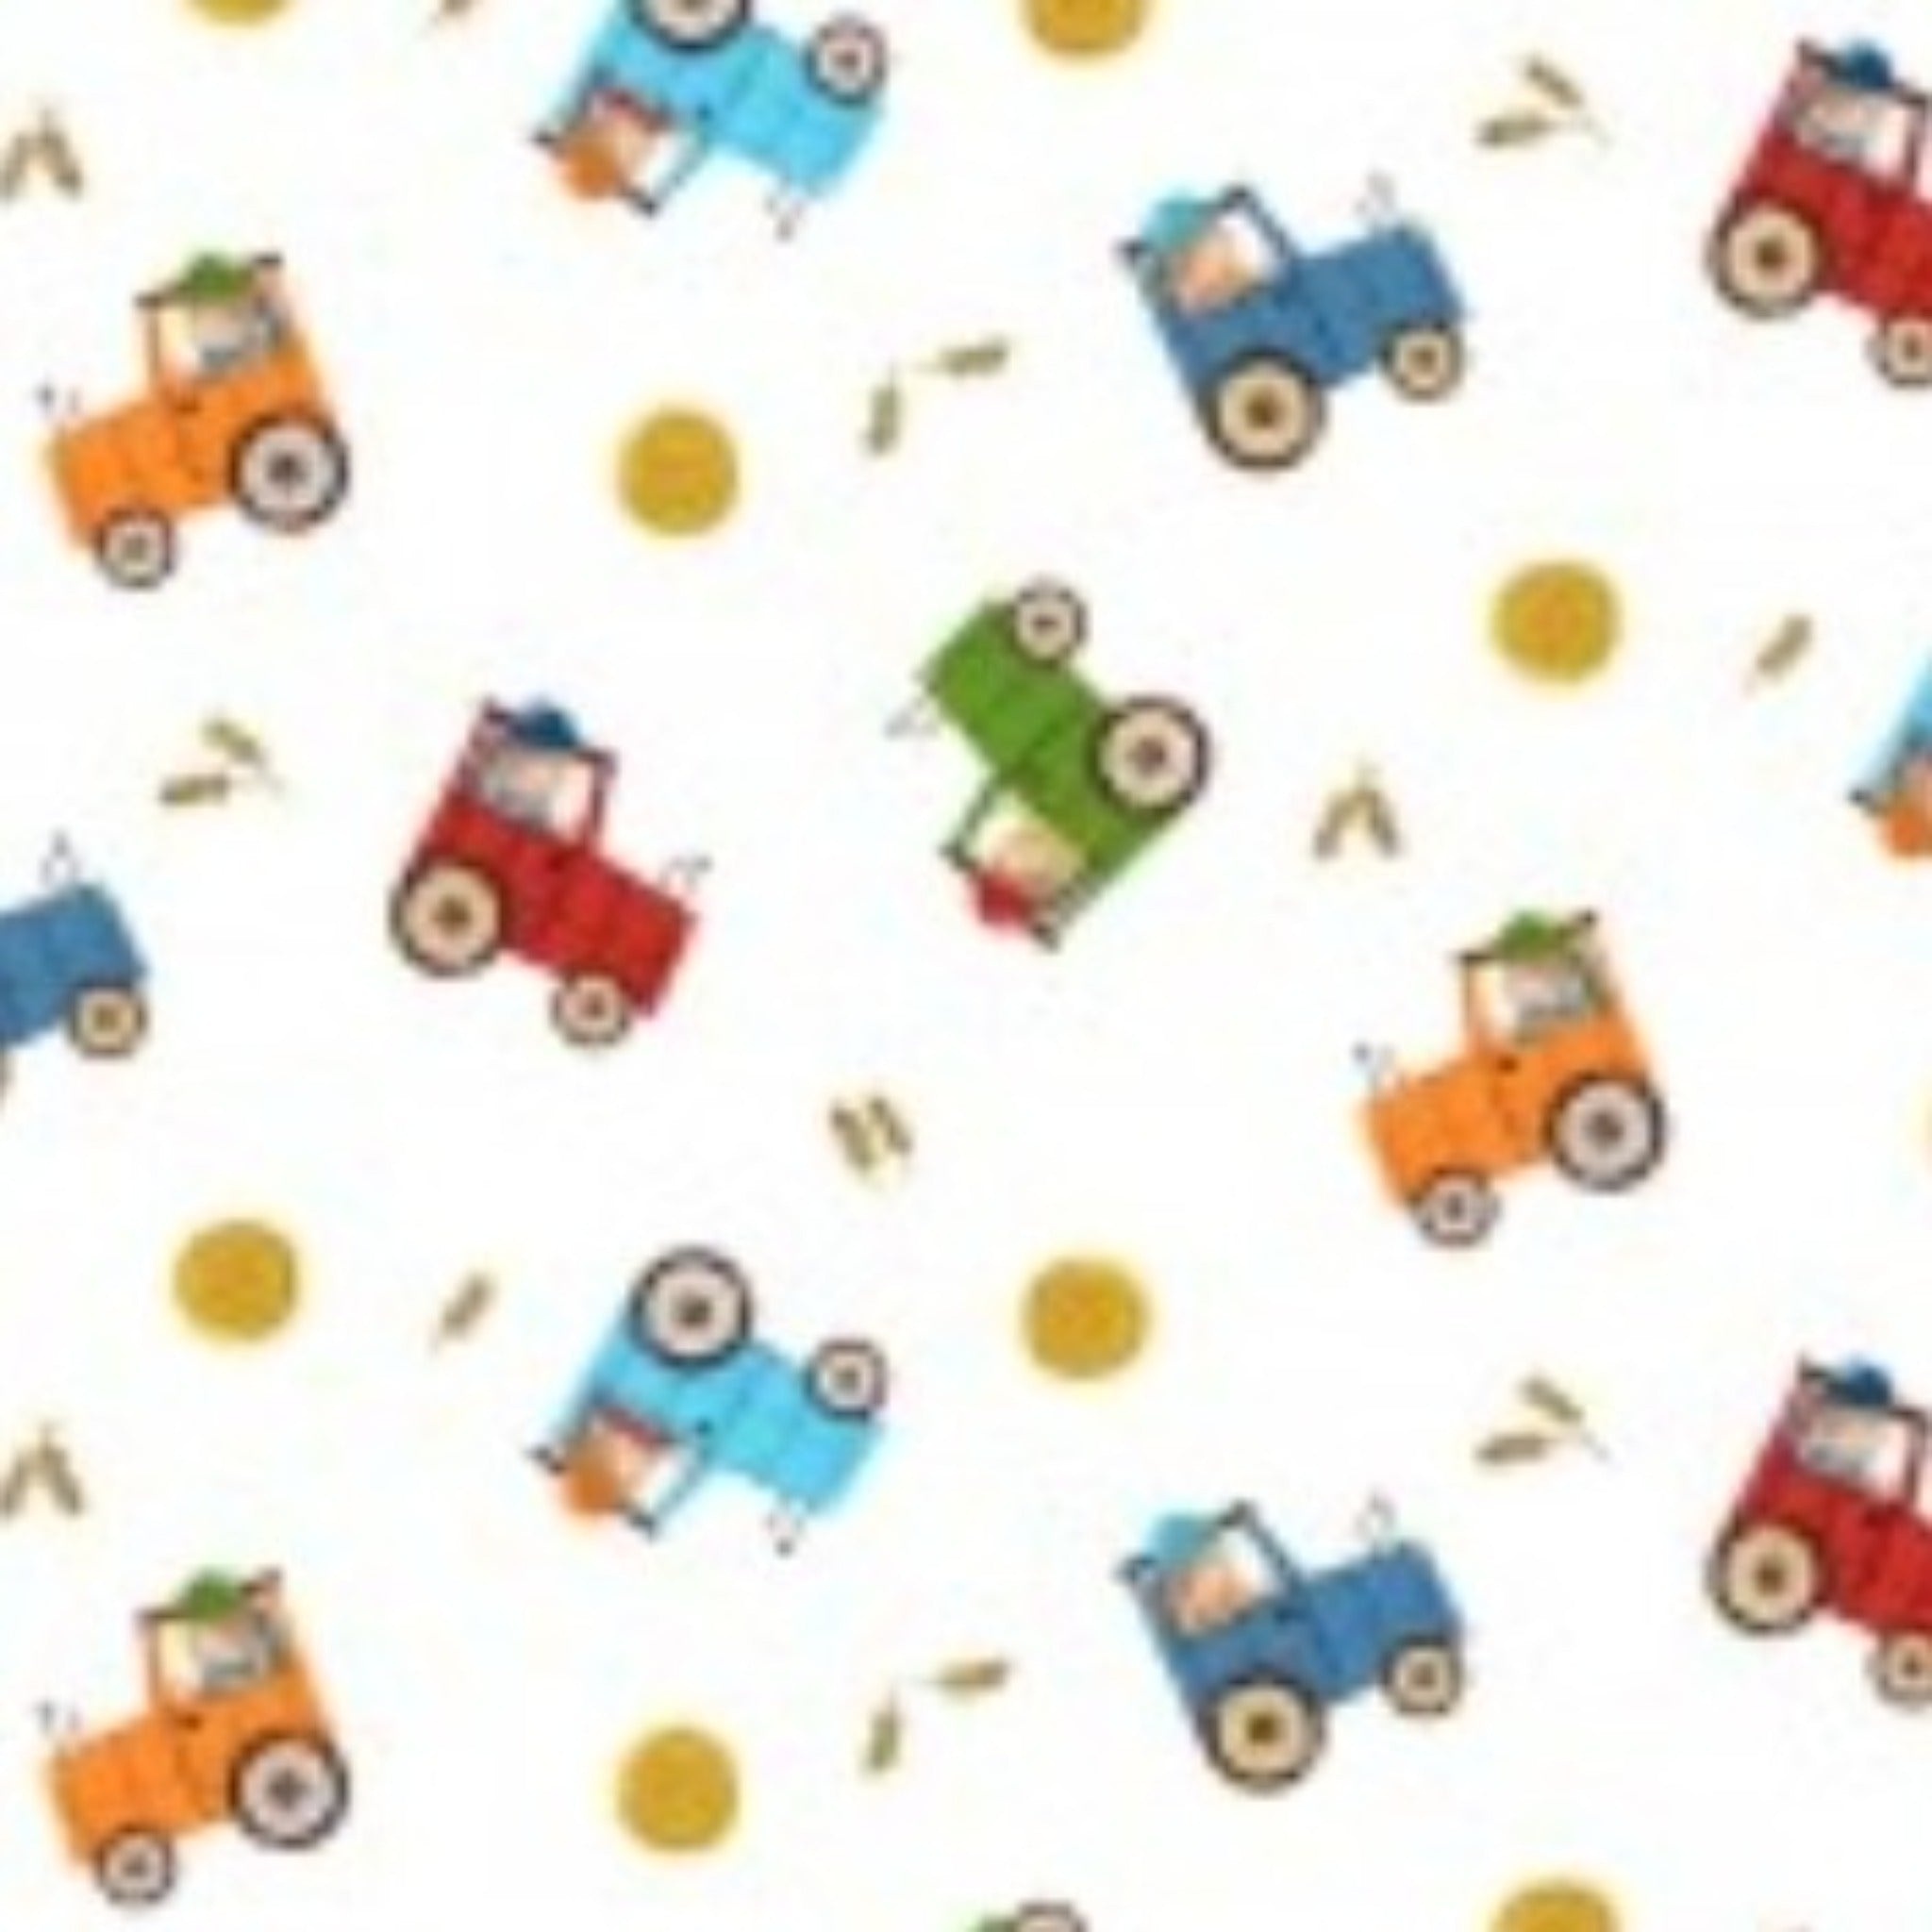 Tractors are Fun Custom Baby and Toddler Bedding - MookyPookyandMuffin